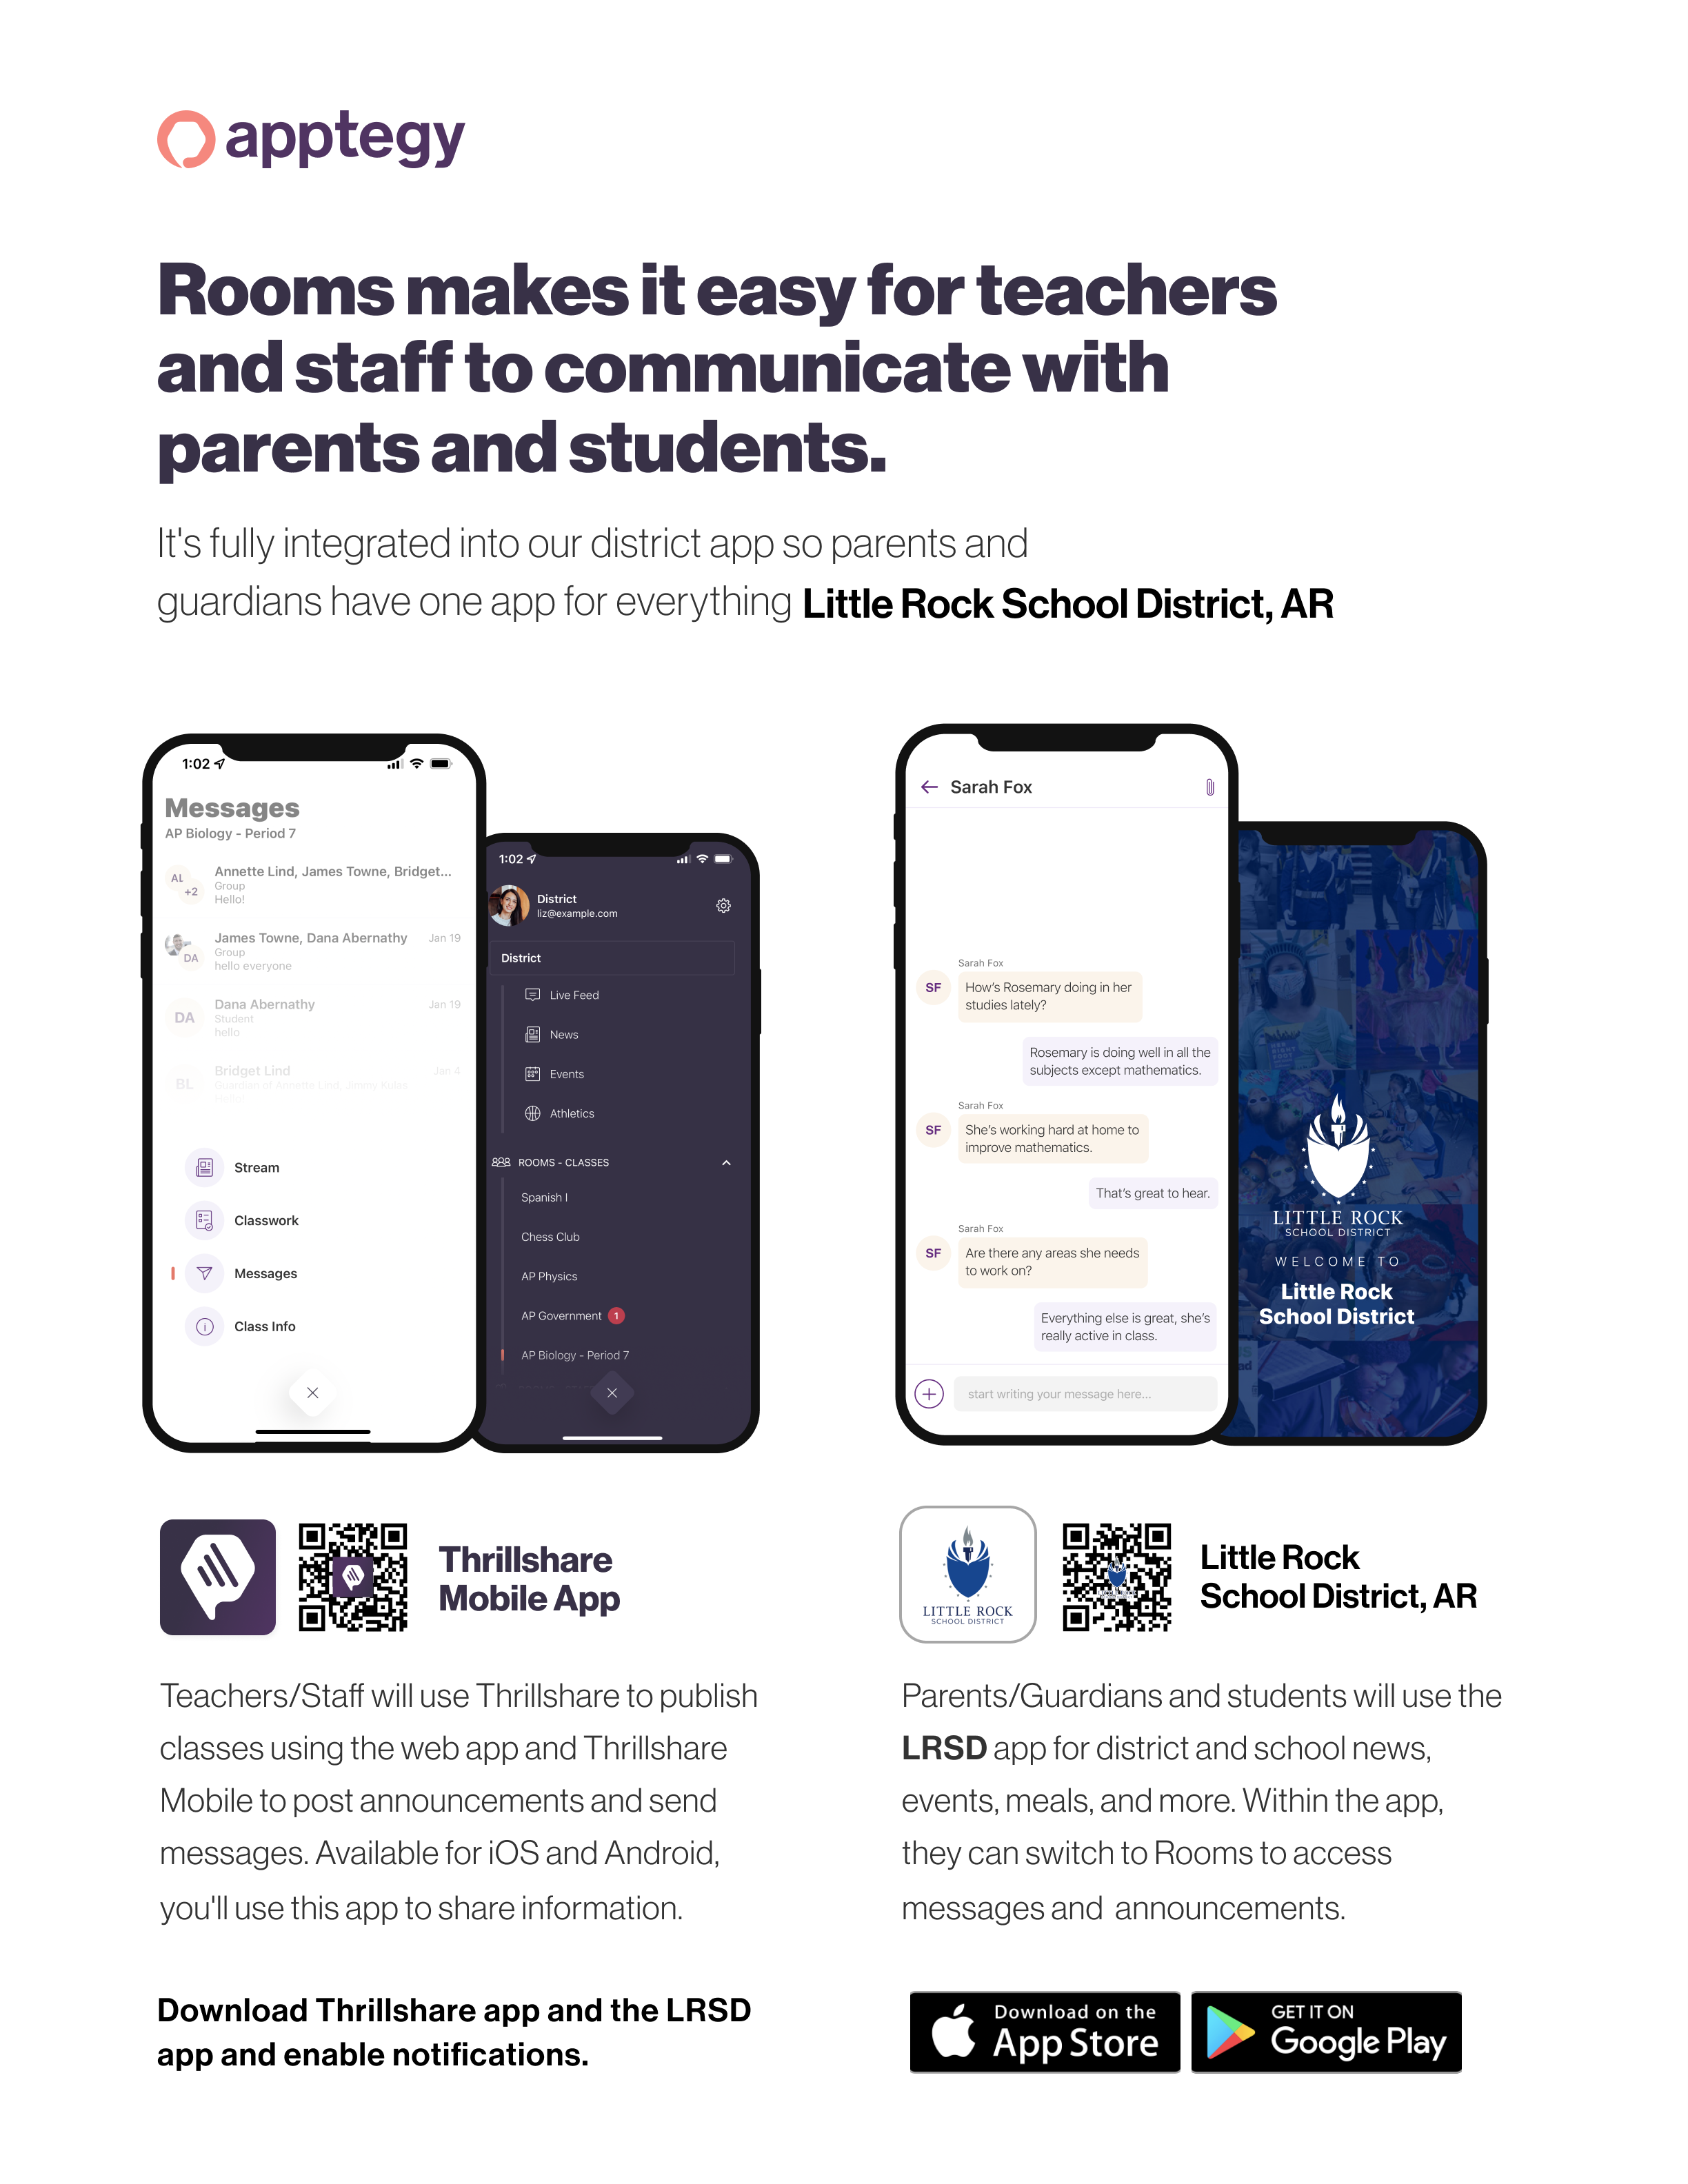 “Say hello to Parent-Teacher chat in the new Rooms app. Download the little rock district app in the Google Play or Apple App store.”